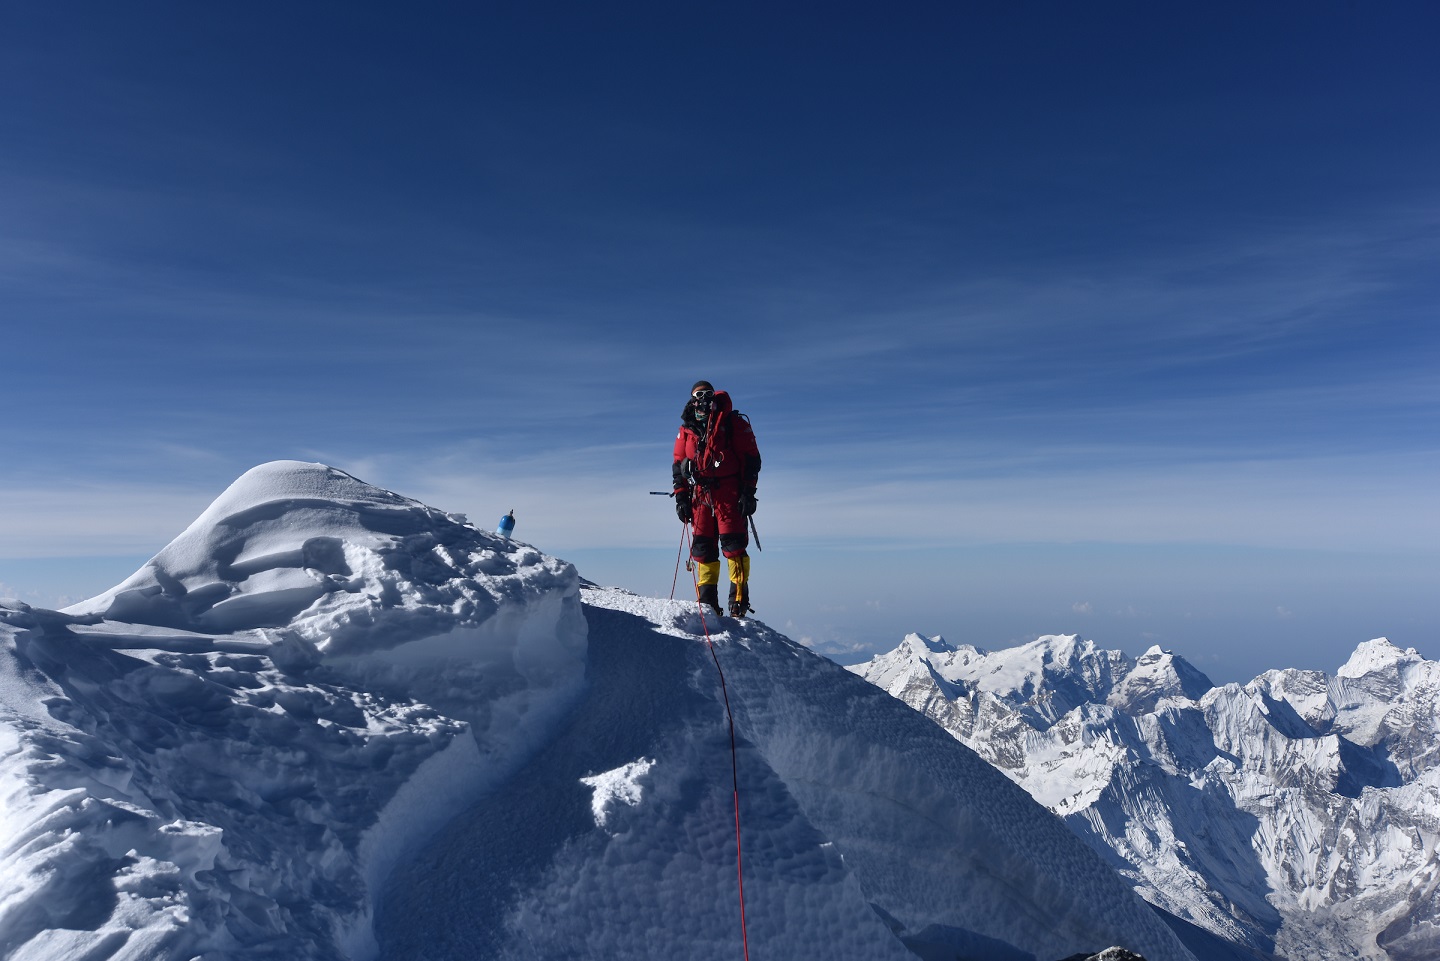 A lone climber stands on top of a snowy mountain peak. The peak is Mount Everest. The climber is dressed in red and using supplemental oxygen. In the background are the Himalayas.